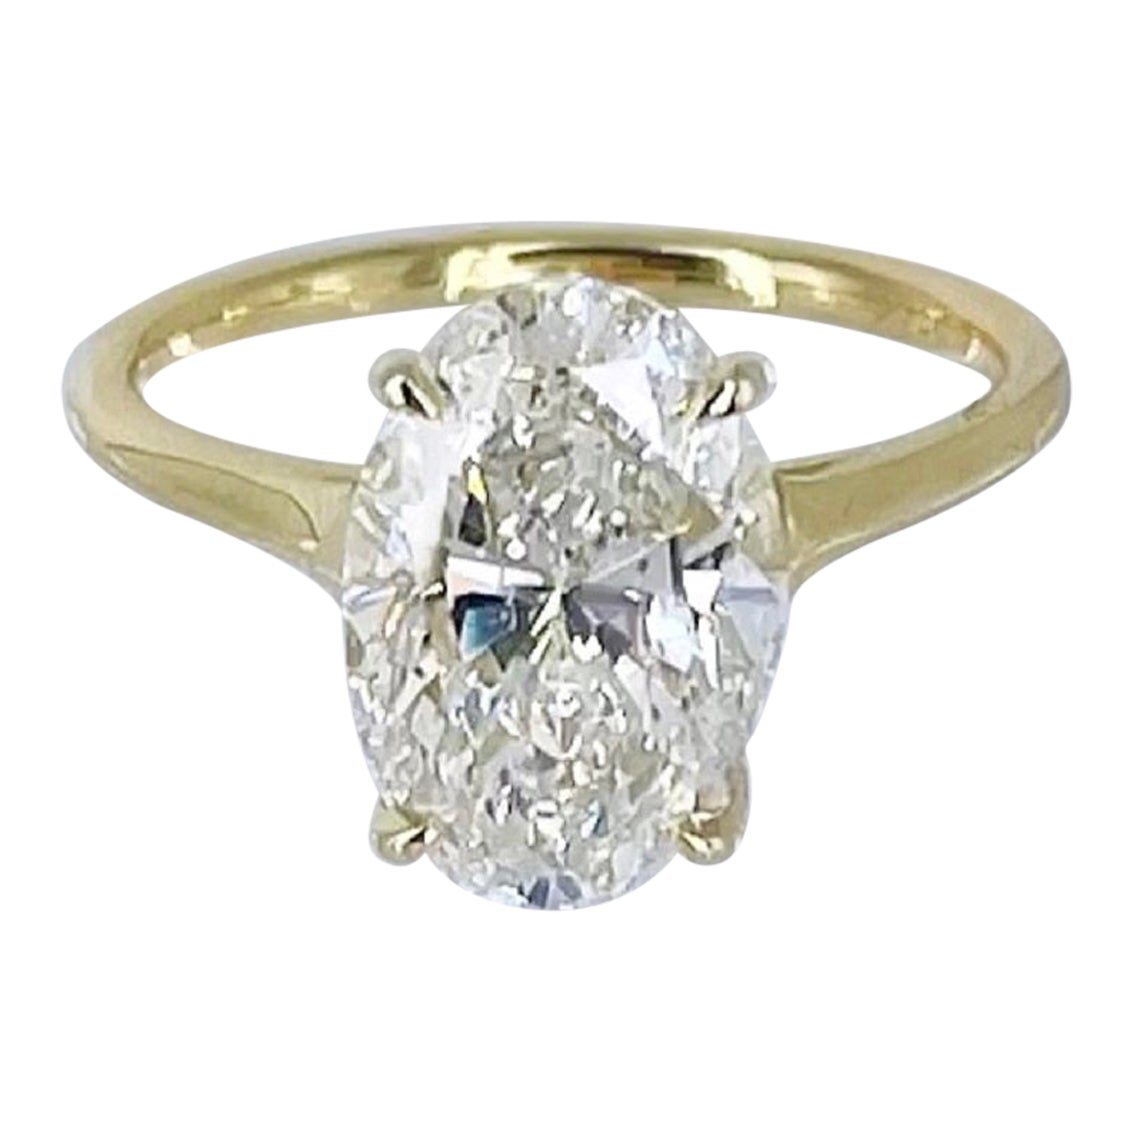 J. Birnbach 3.95 carat Oval Diamond Solitaire Engagement Ring in 14K Yellow Gold For Sale